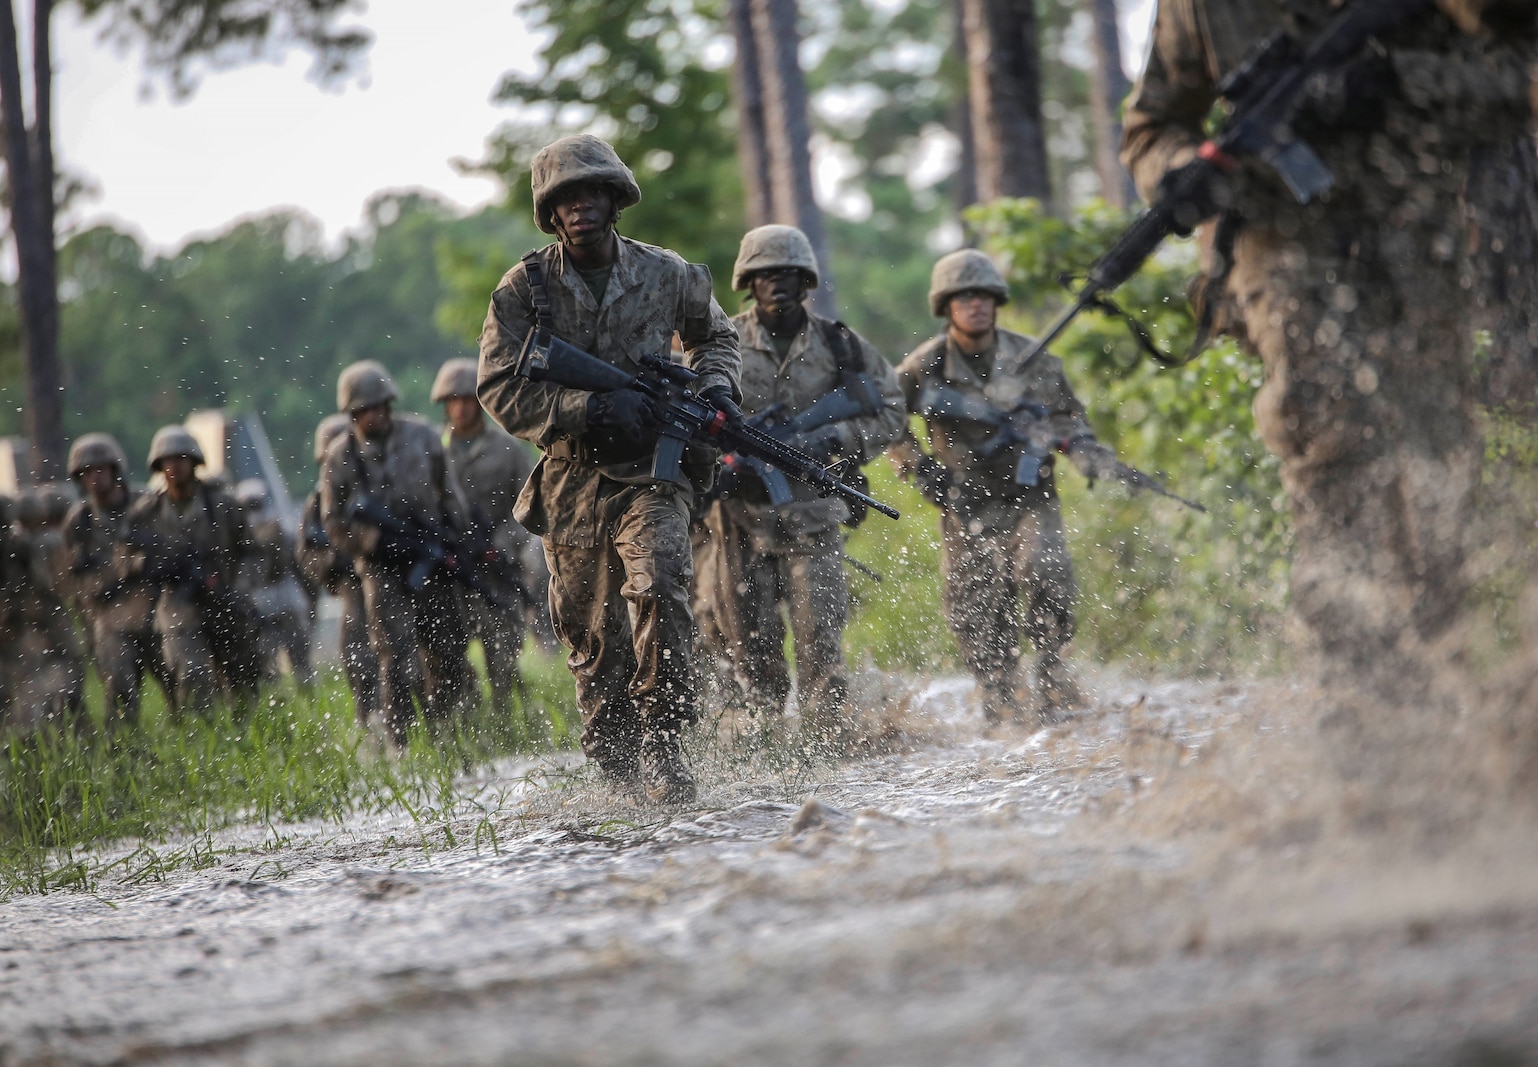 Recruits with Alpha Company participate in the Crucible on Parris Island, S.C. June 14, 2019. The Crucible is a 54-hour culminating event that requires recruits to work as a team and overcome challenges in order to earn the title United States Marine.

(U.S. Marine Corps photo by Sgt. Dana Beesley)